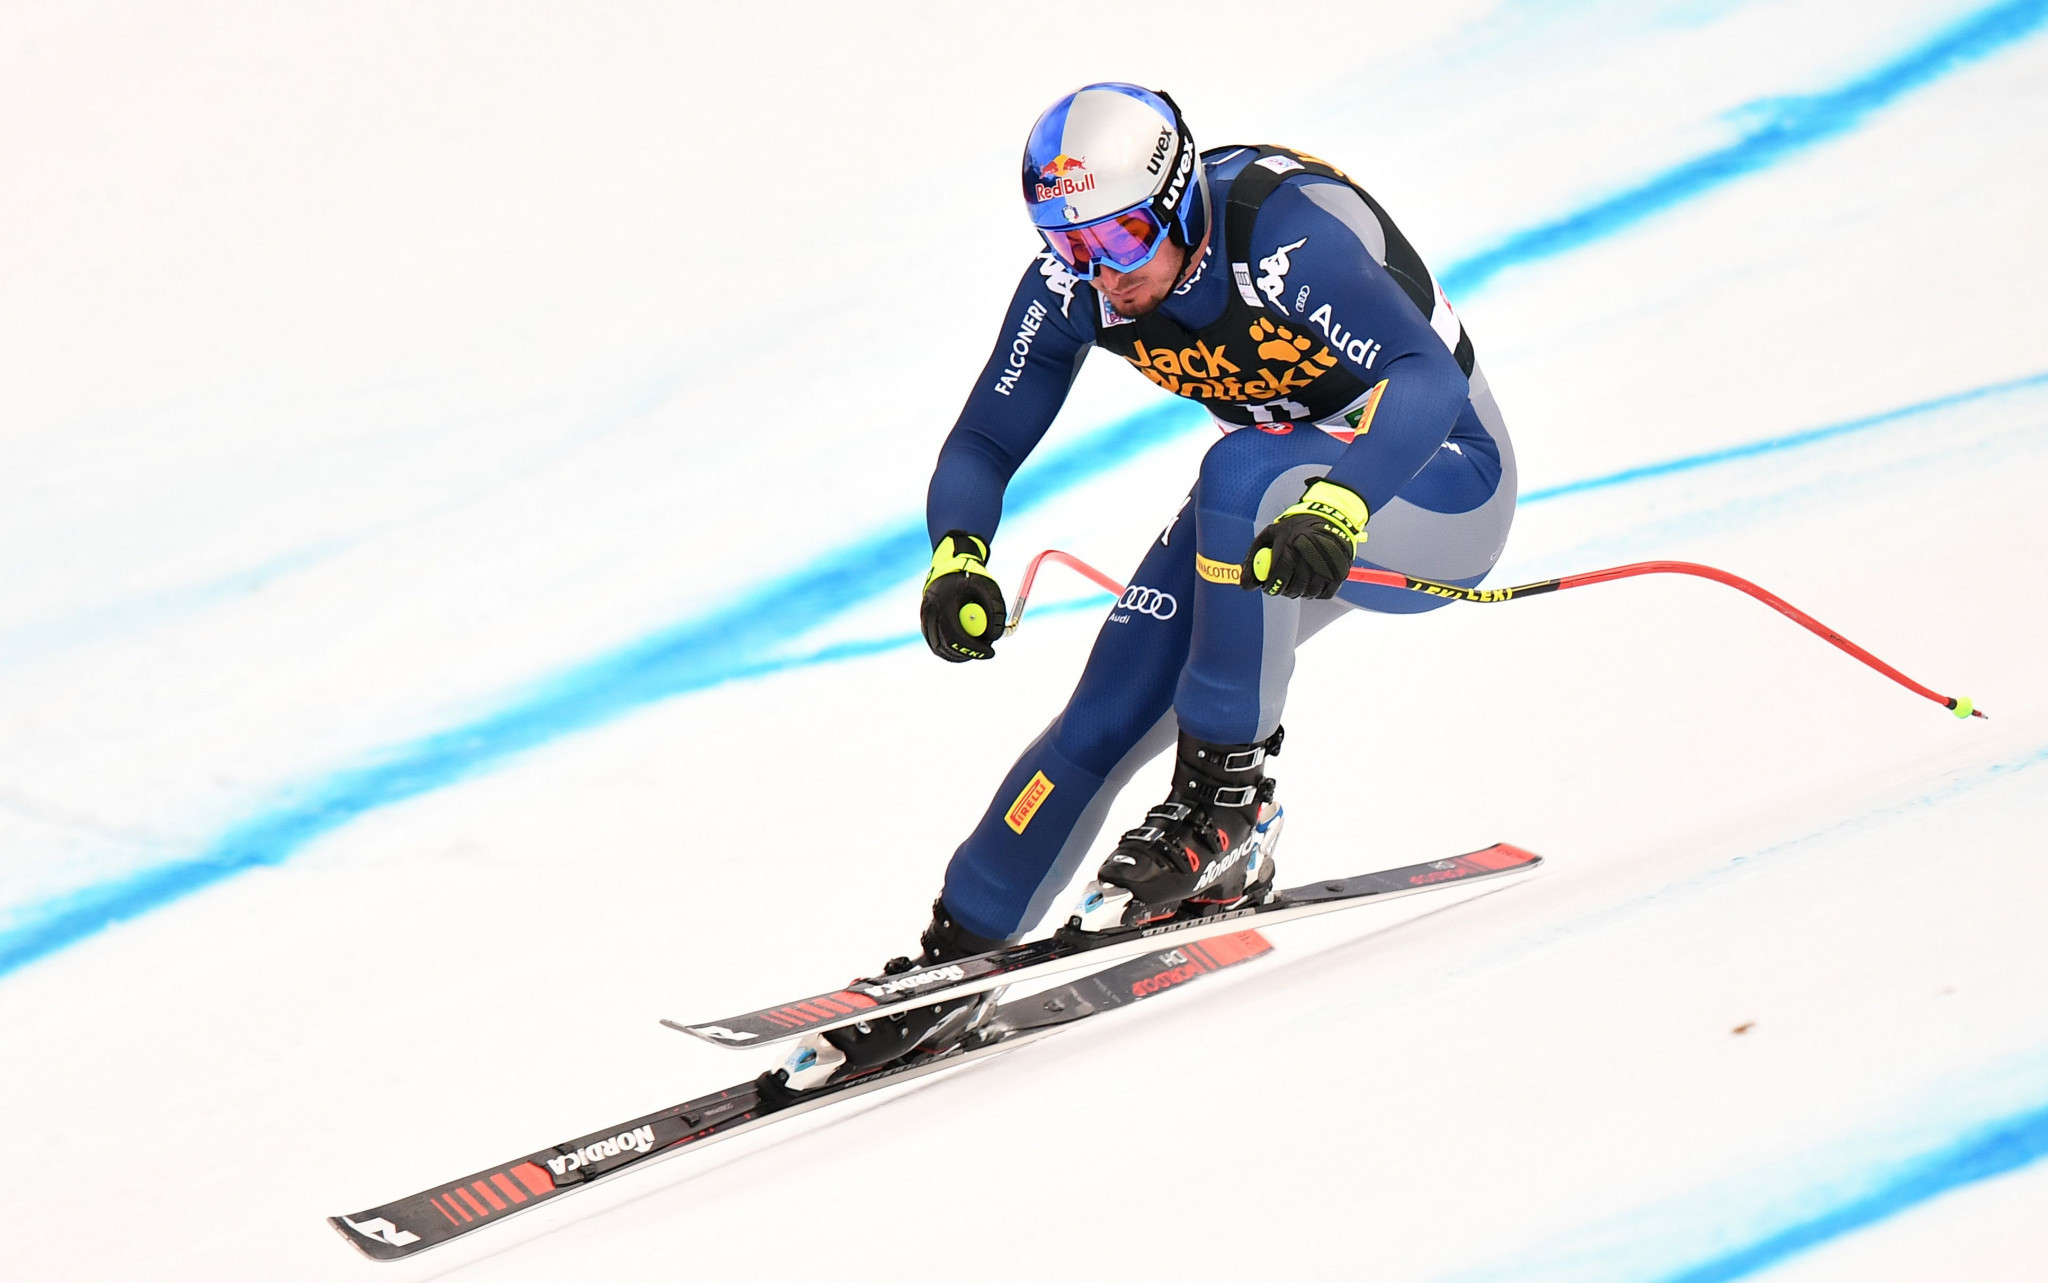 The FIS Alpine Skiing Committee met online to discuss the upcoming season ©Getty Images